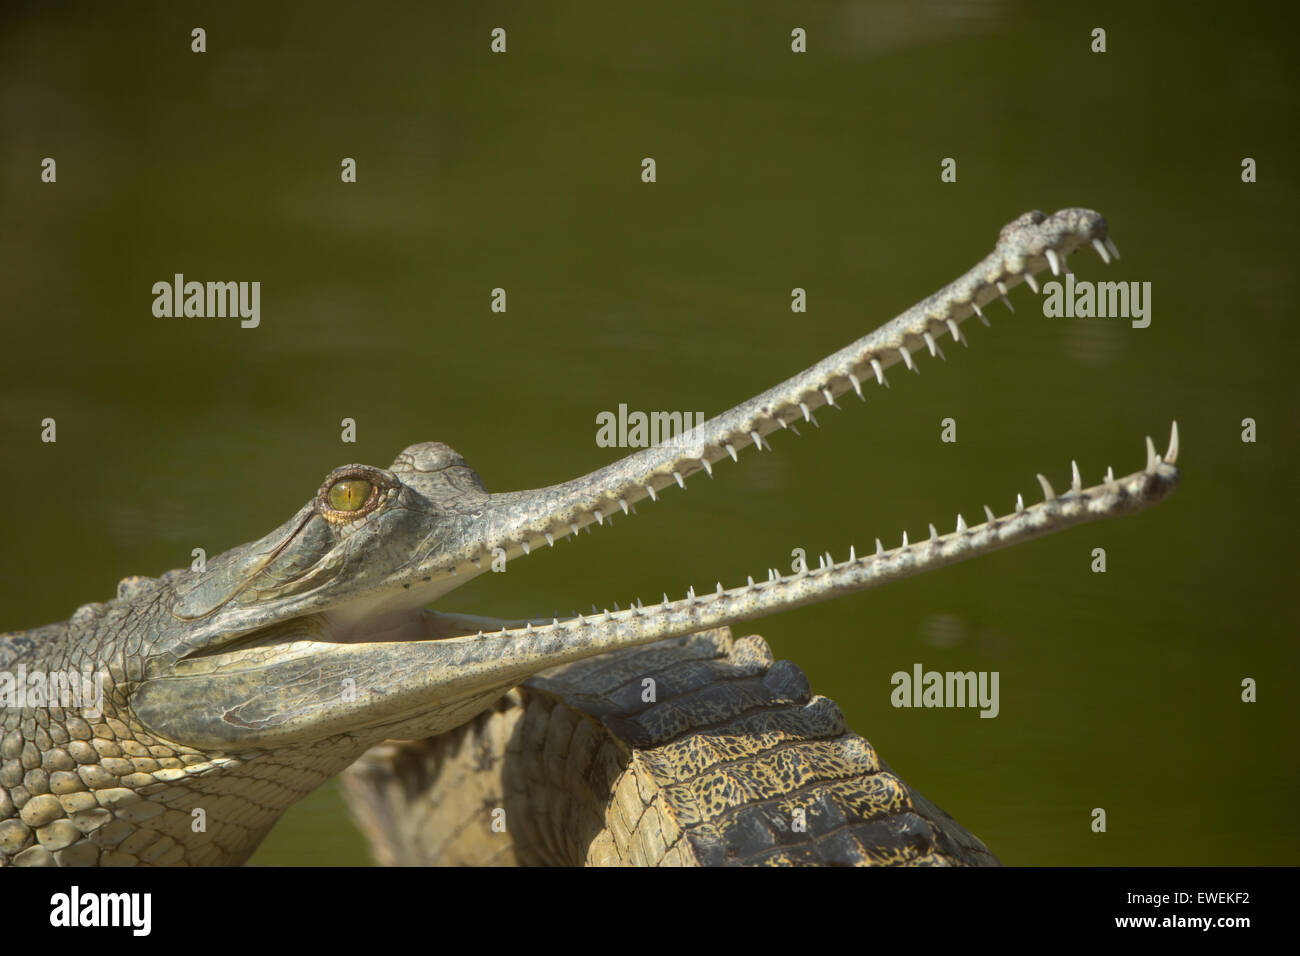 A Gharial in a breeding center in Chitwan national park in Nepal Stock Photo